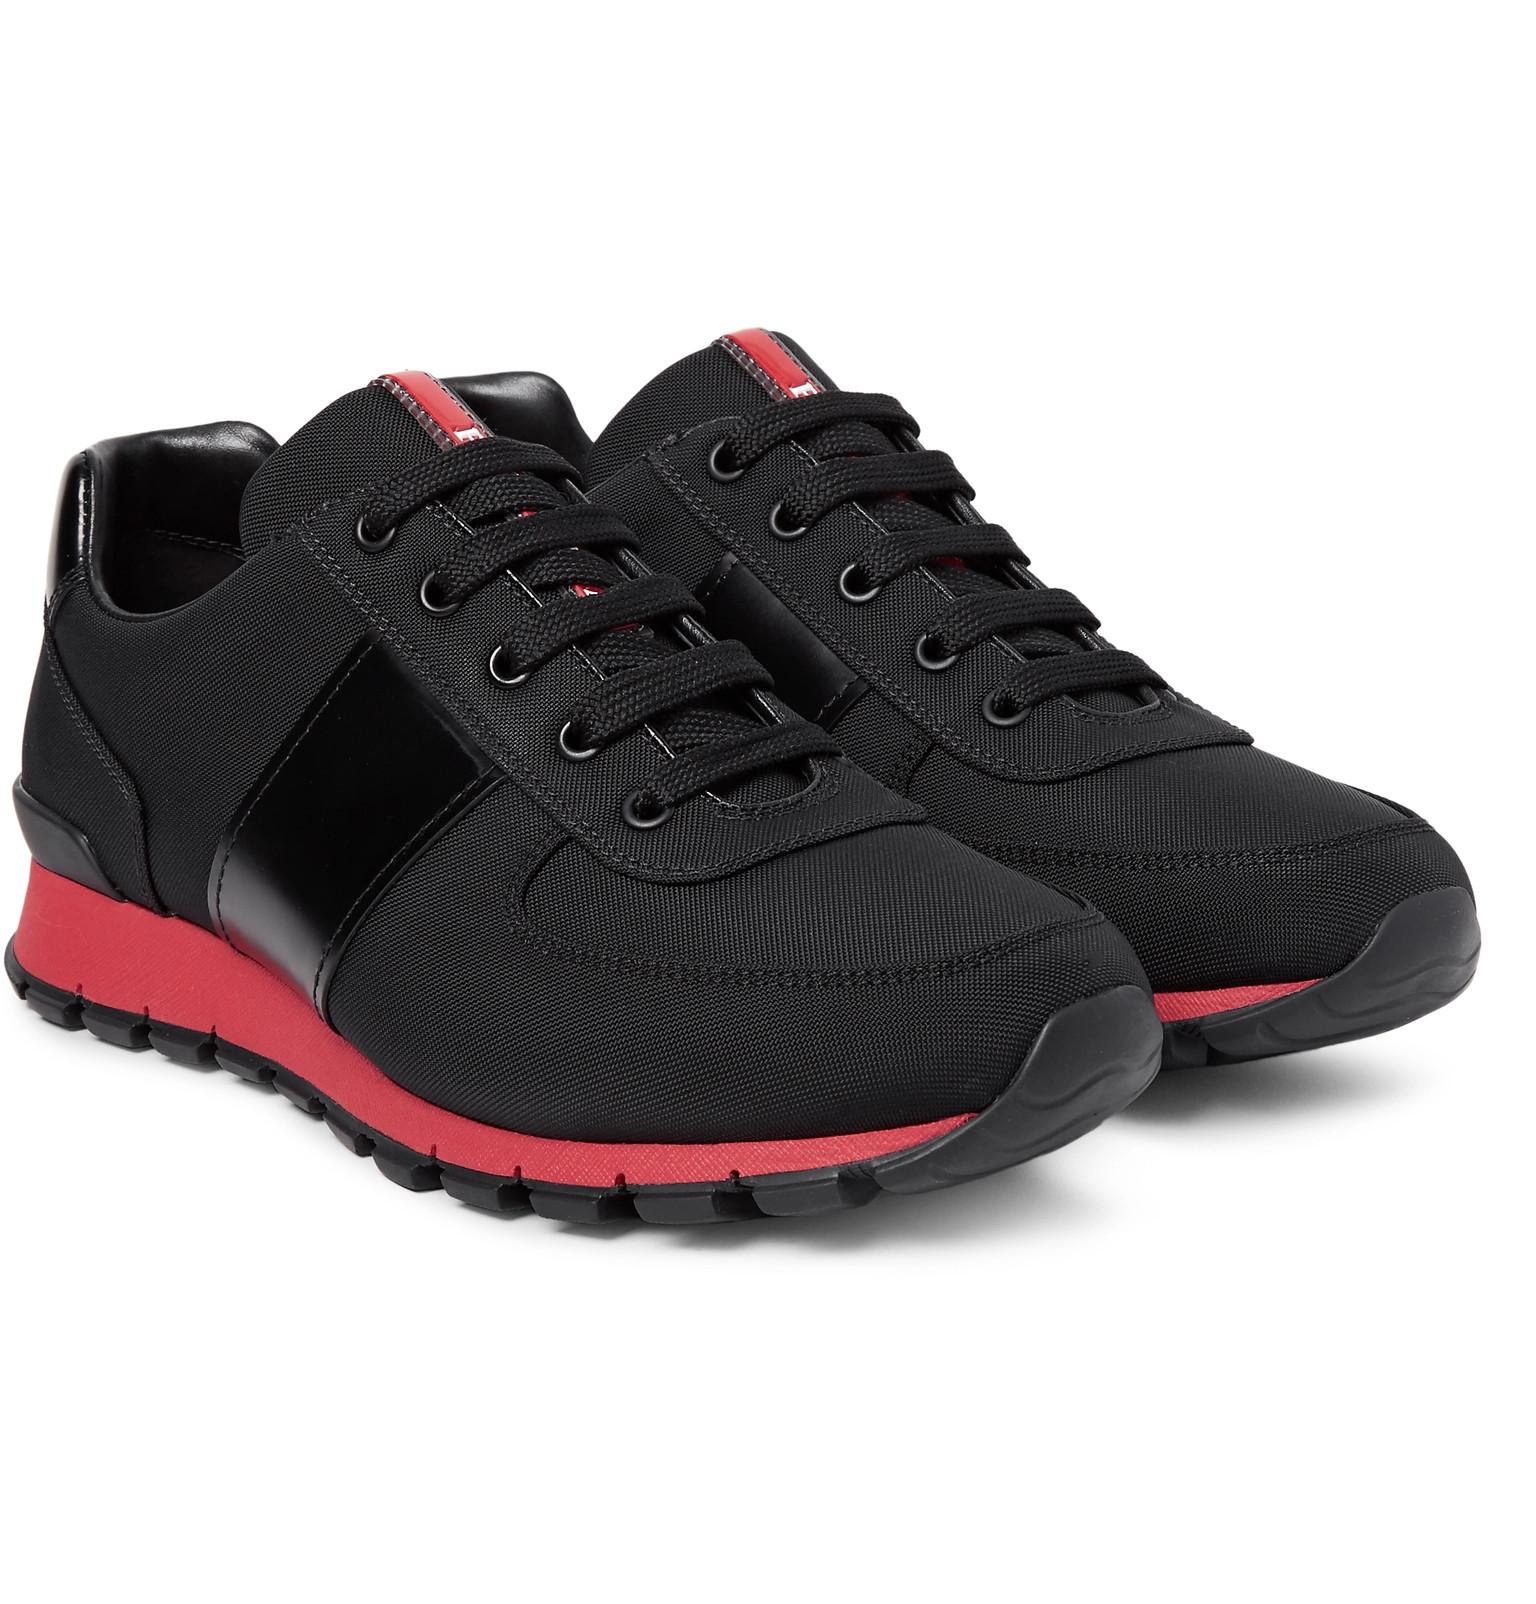 Prada Match Race Leather-trimmed Canvas Sneakers in Black for Men - Lyst